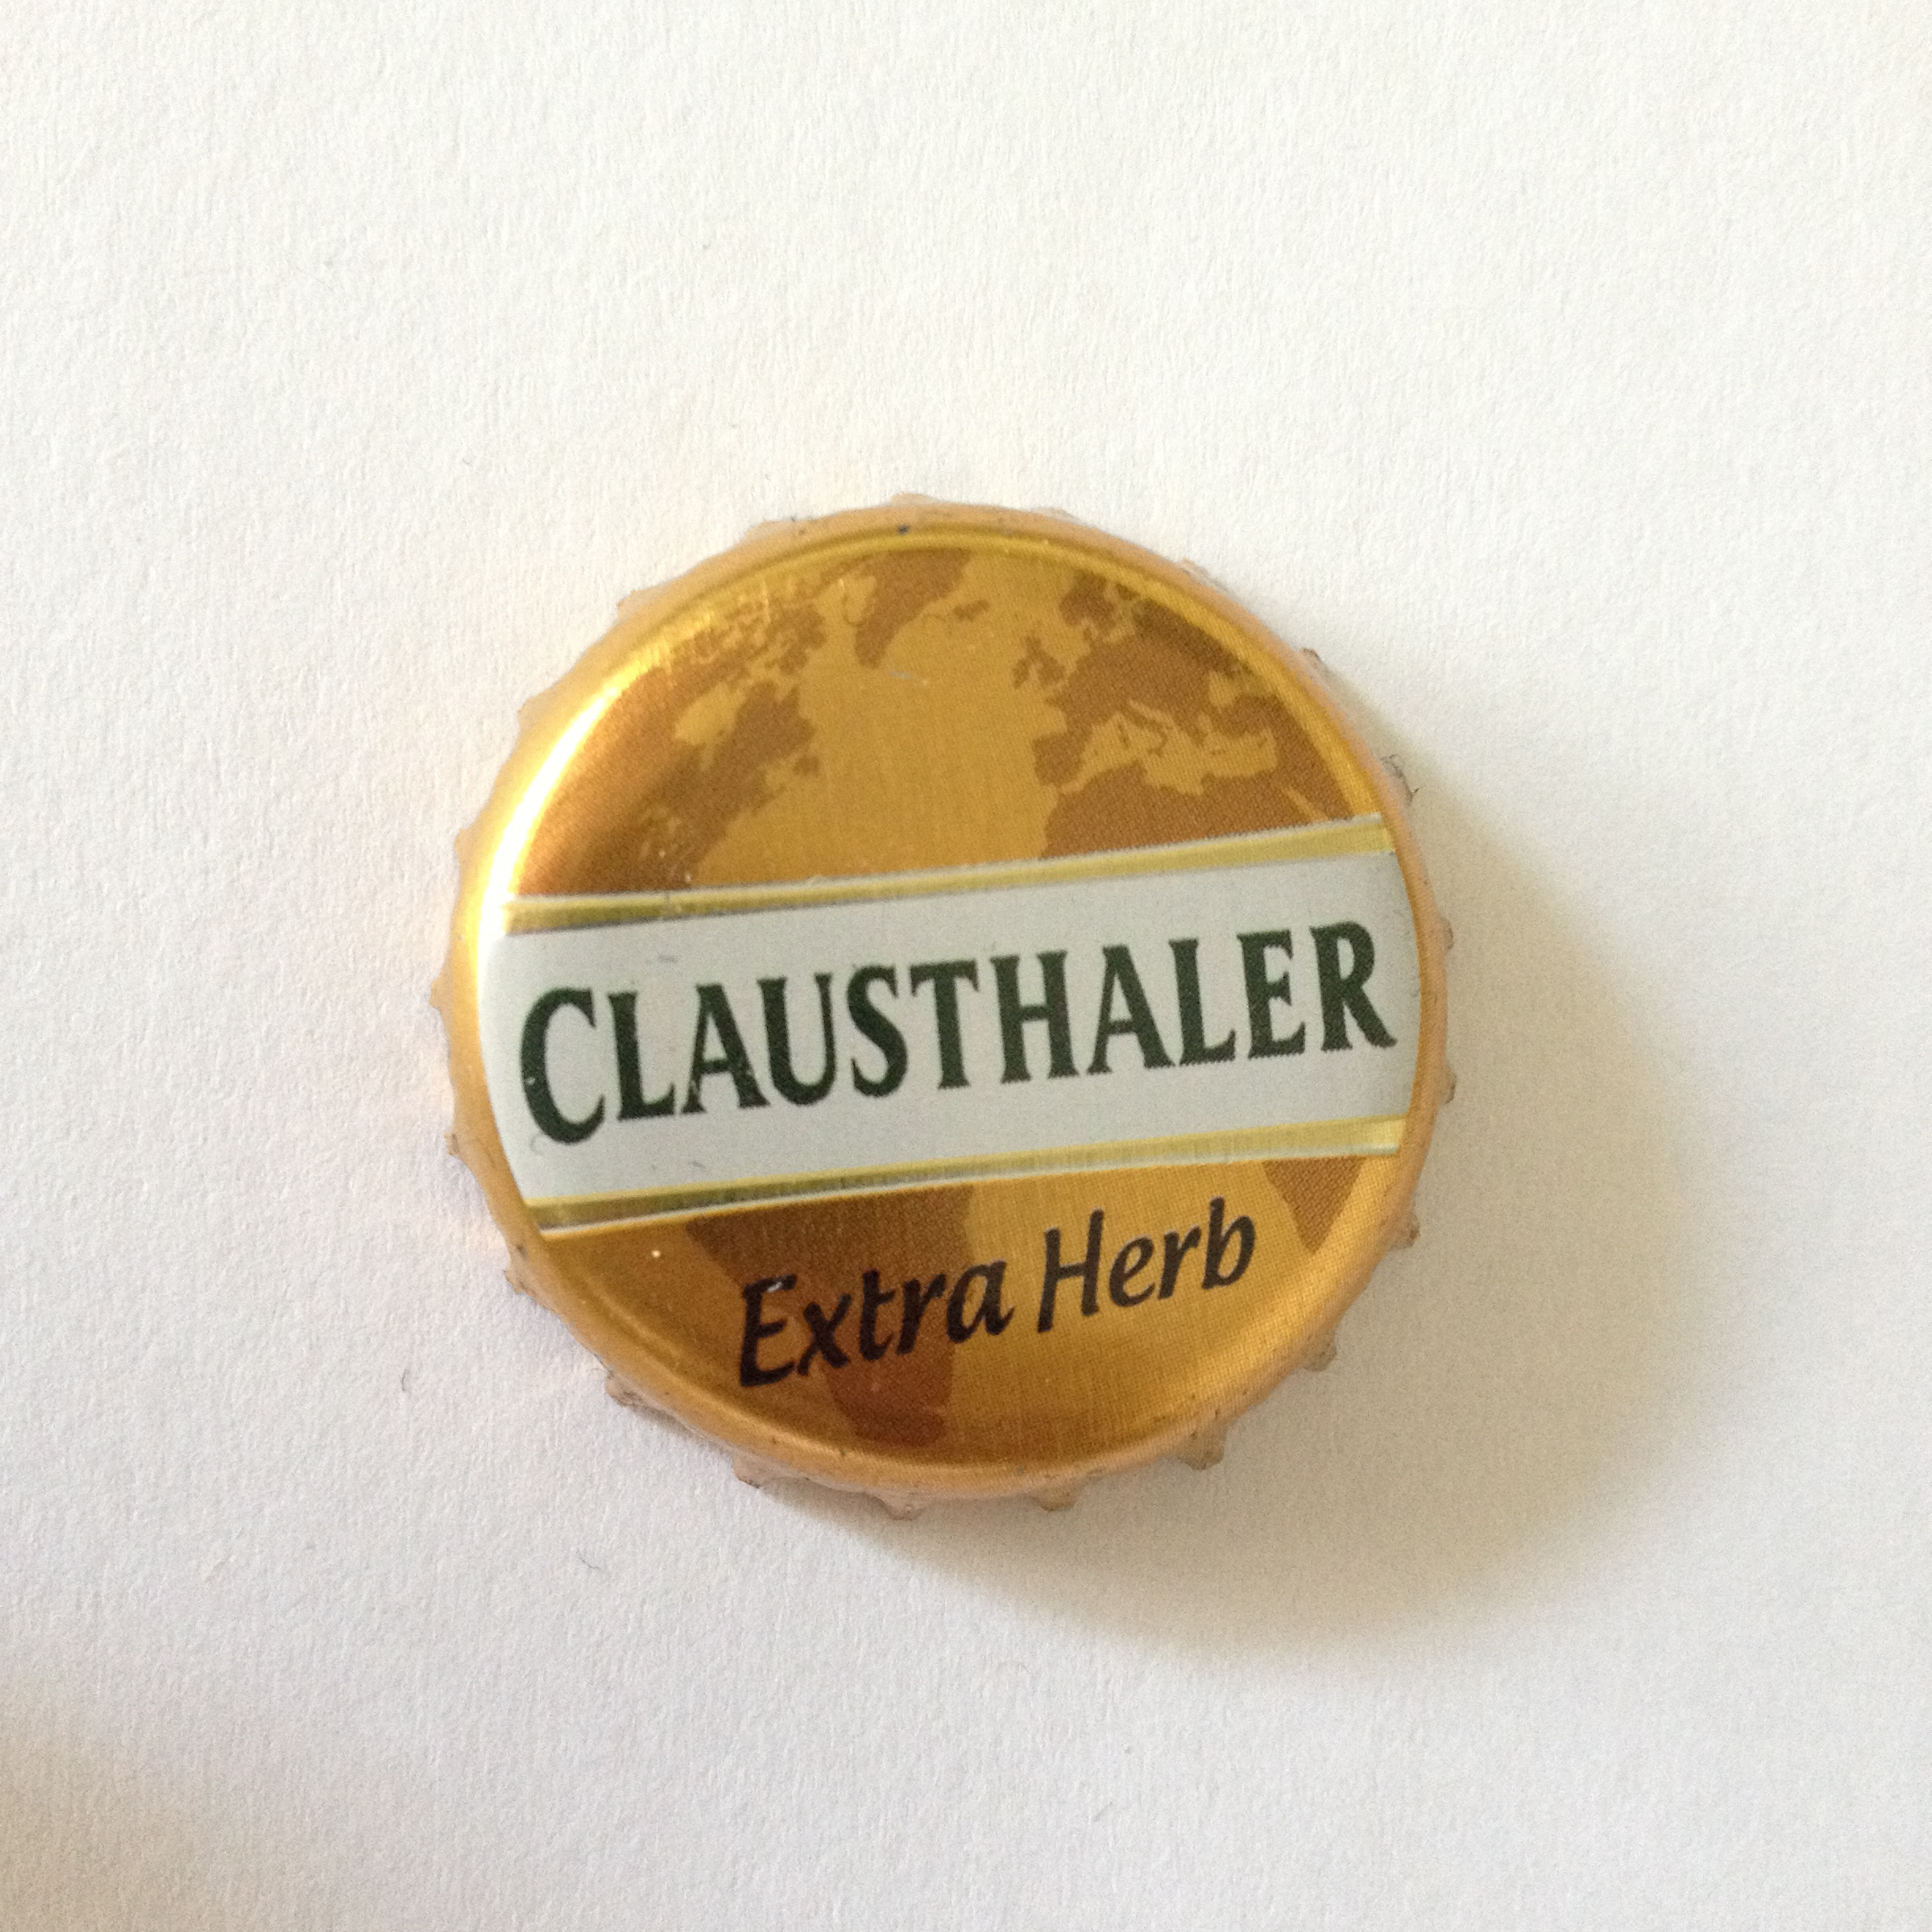 Clausthaler Extra Herb